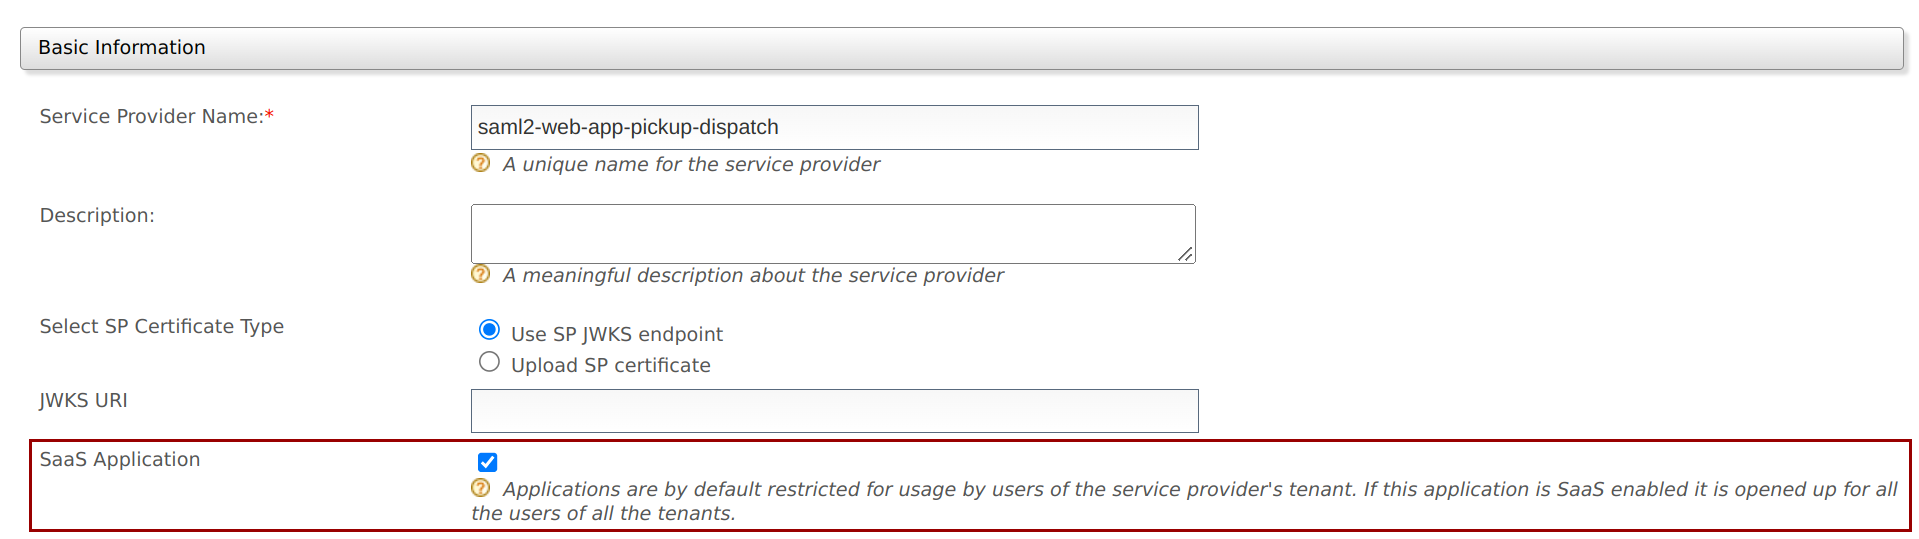 Enable servie provider as a SaaS application